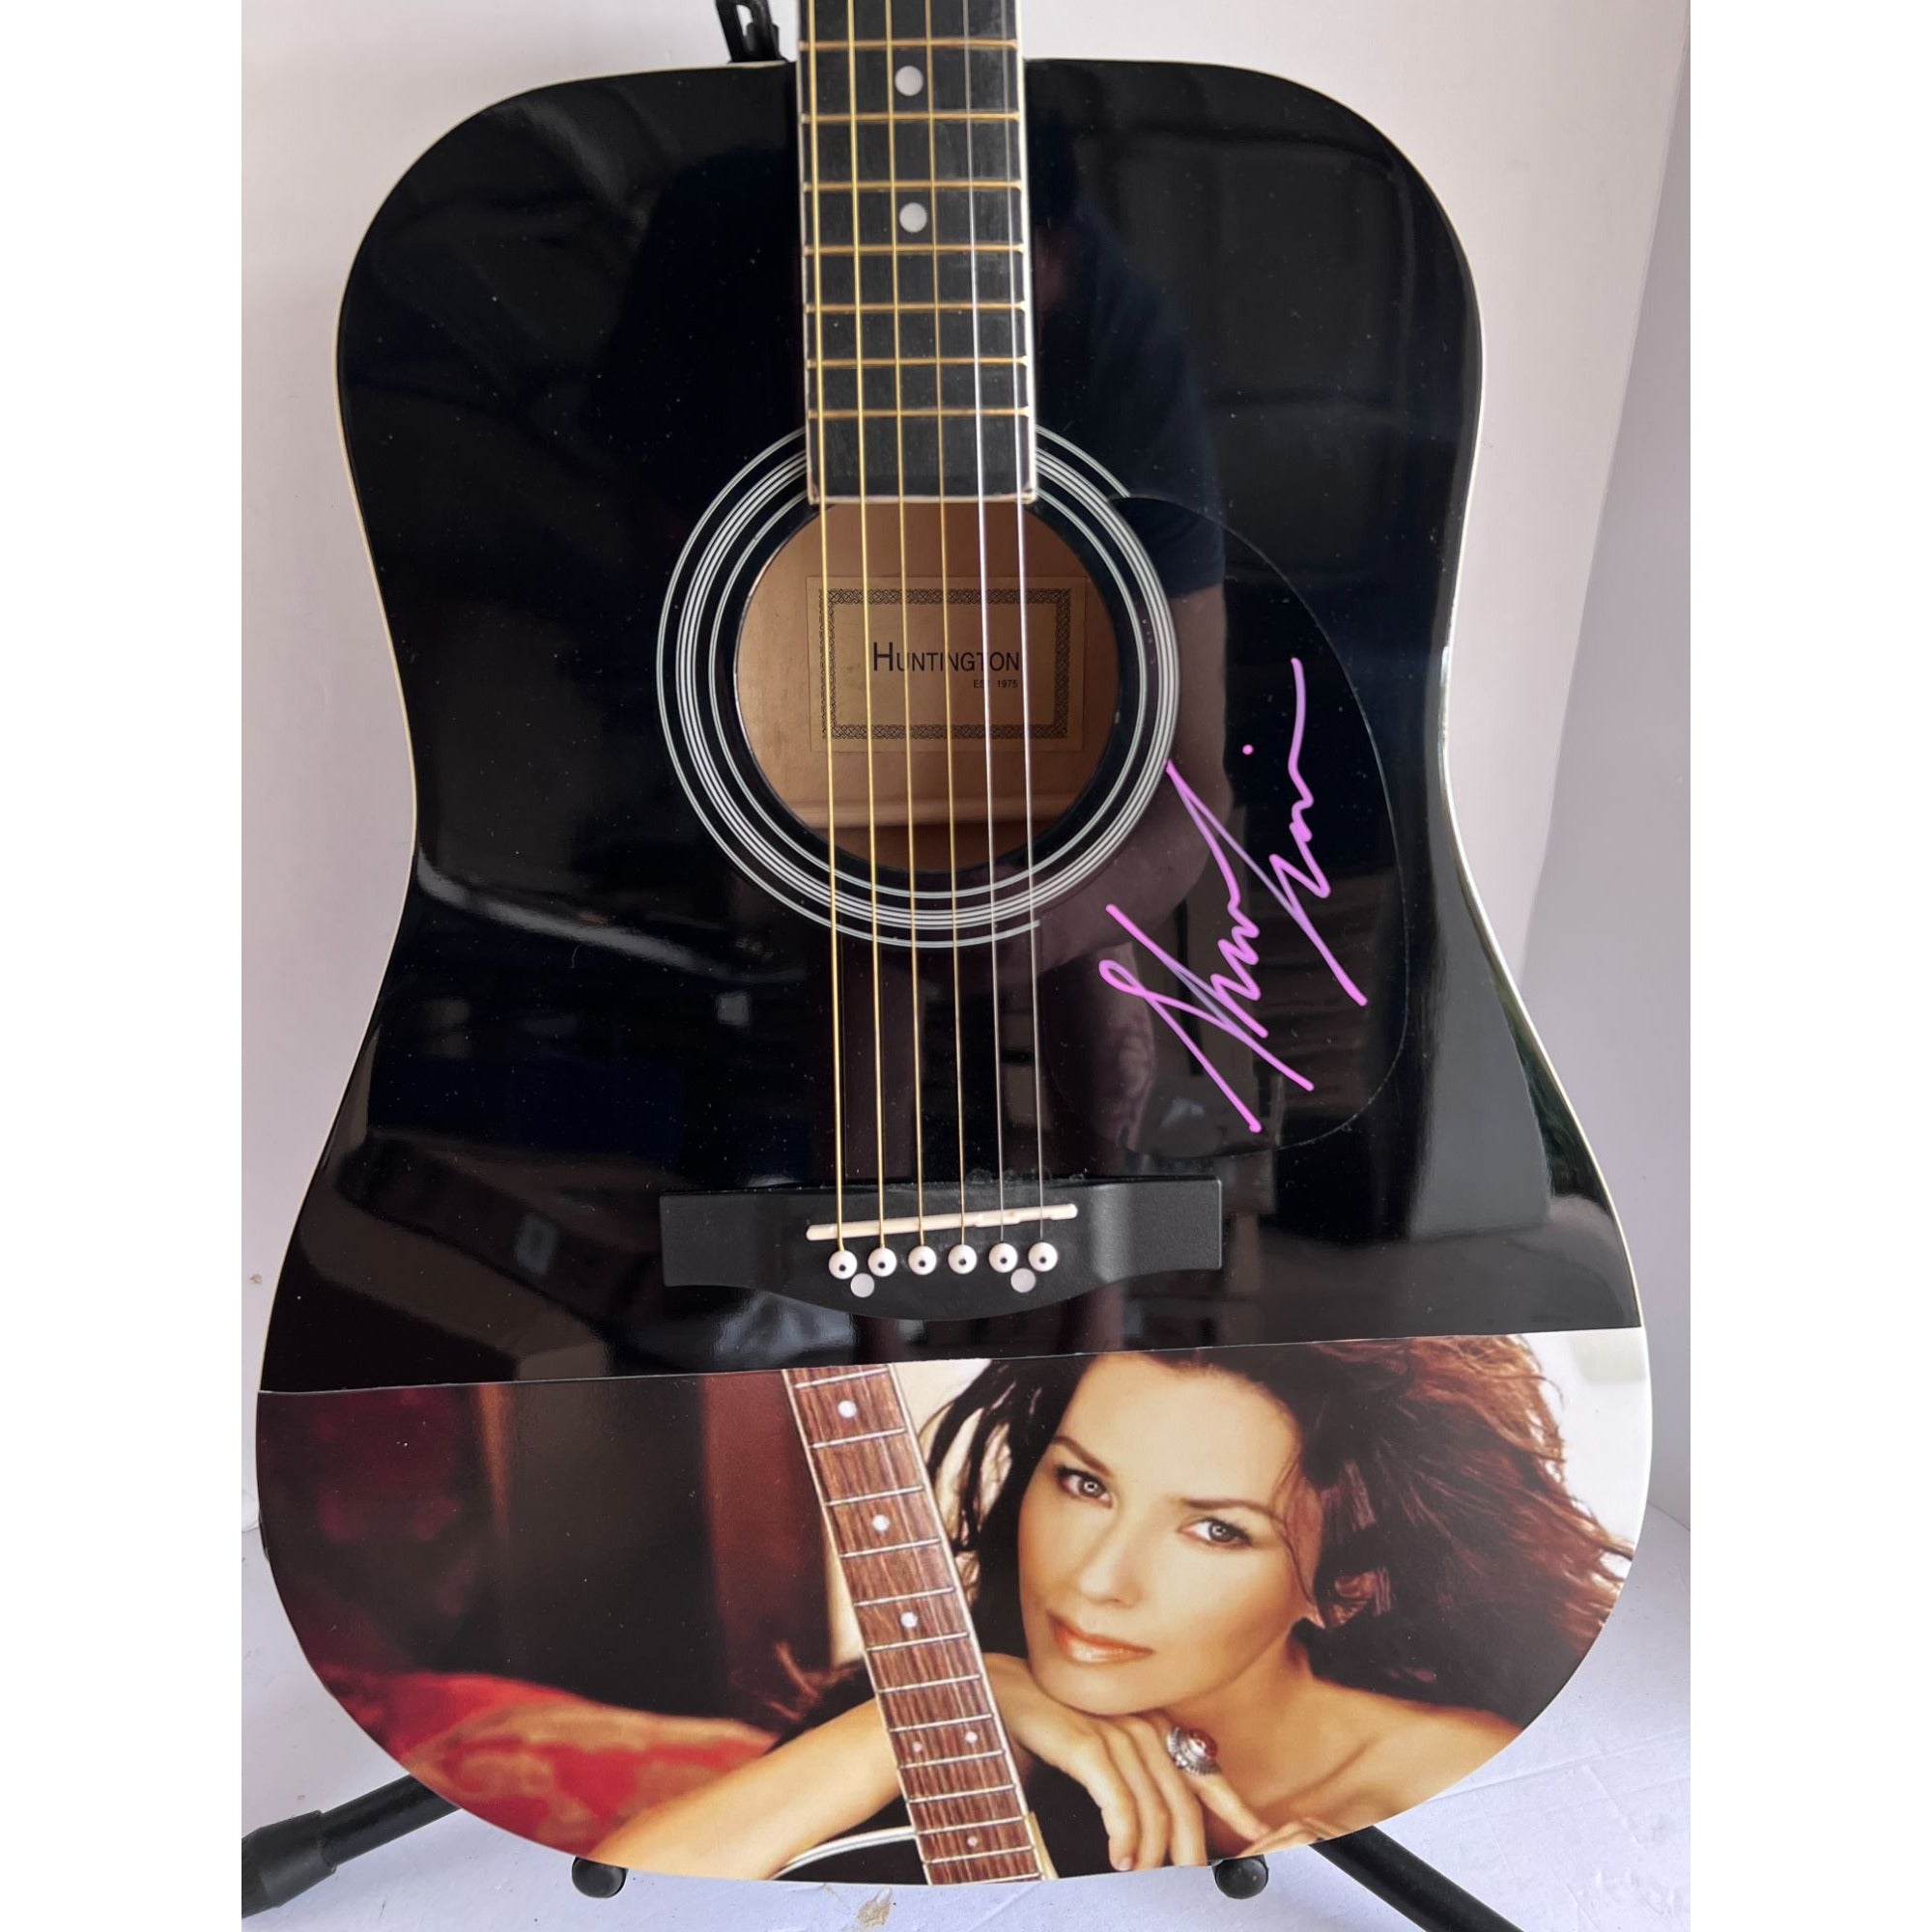 Shania Twain  One of A kind 39' inch full size acoustic guitar signed